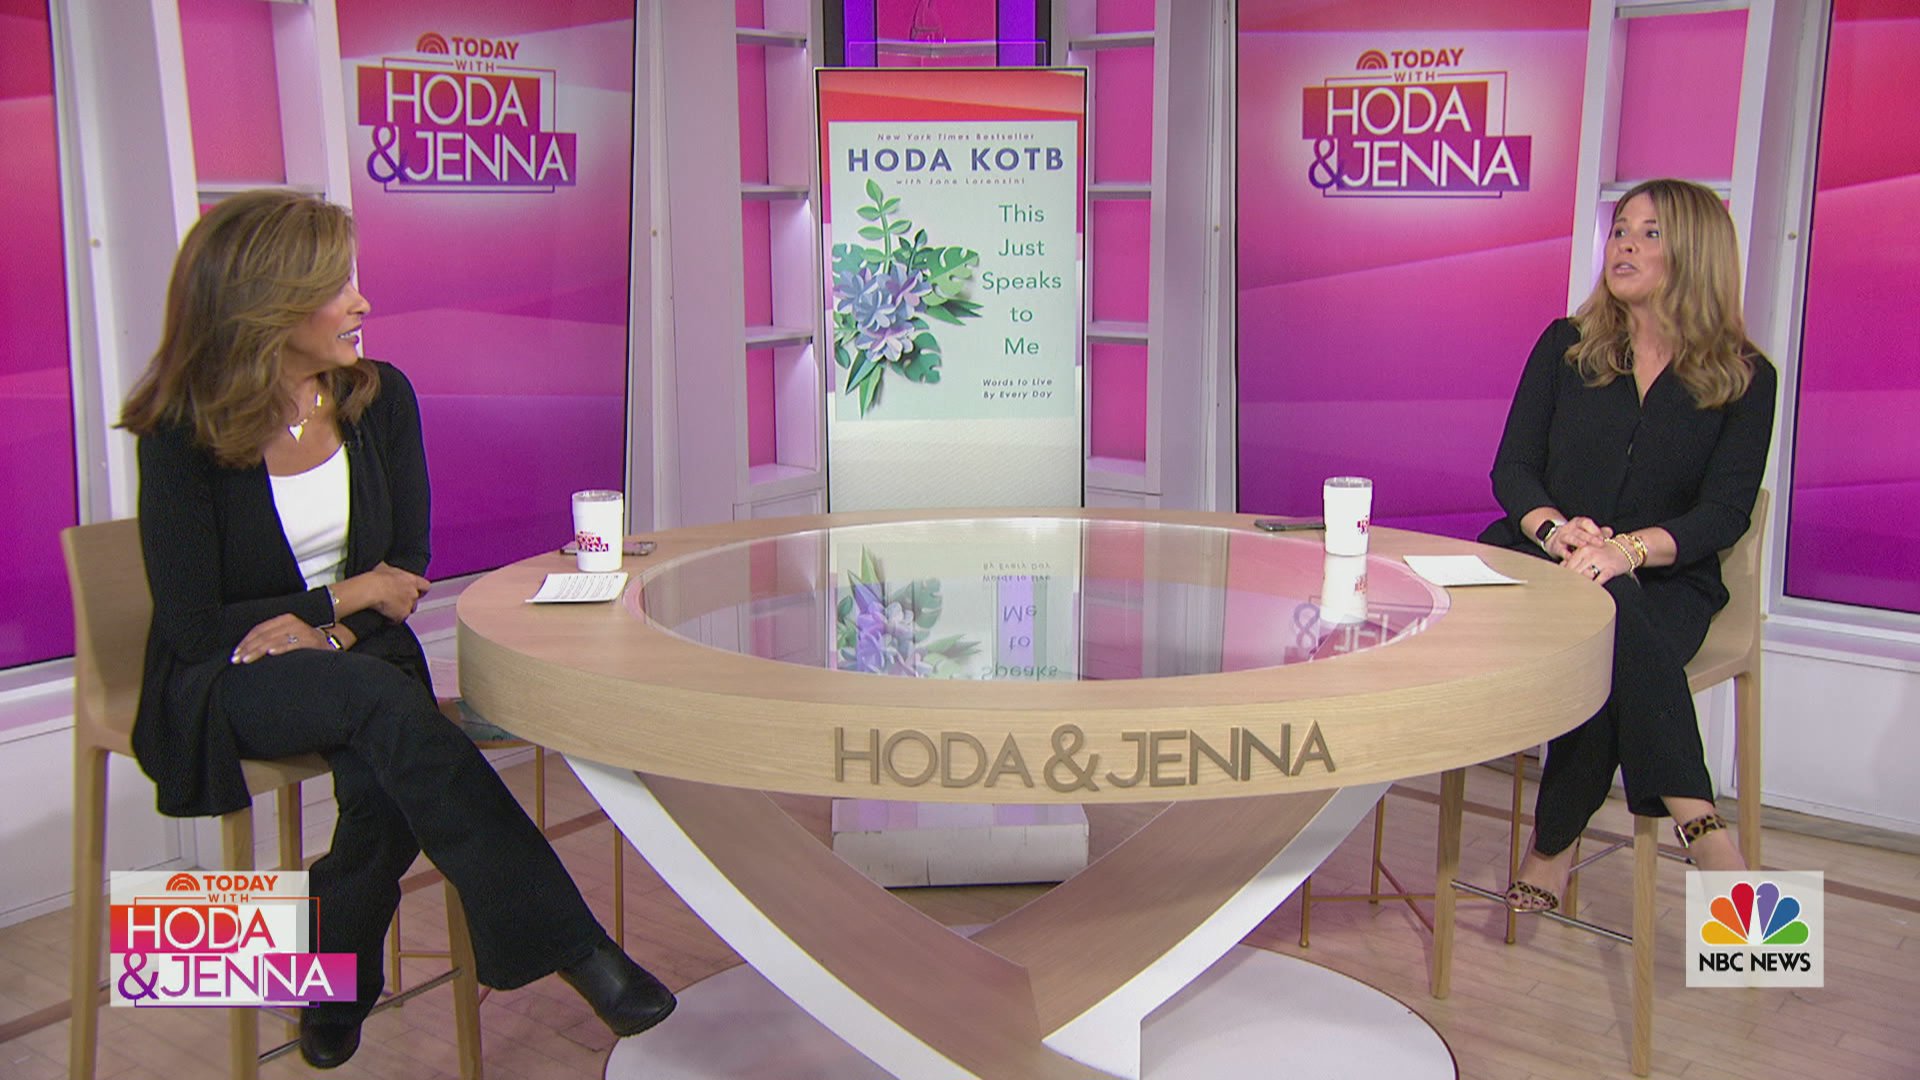 Watch TODAY Episode: Hoda and Jenna - Oct. 22, 2020 